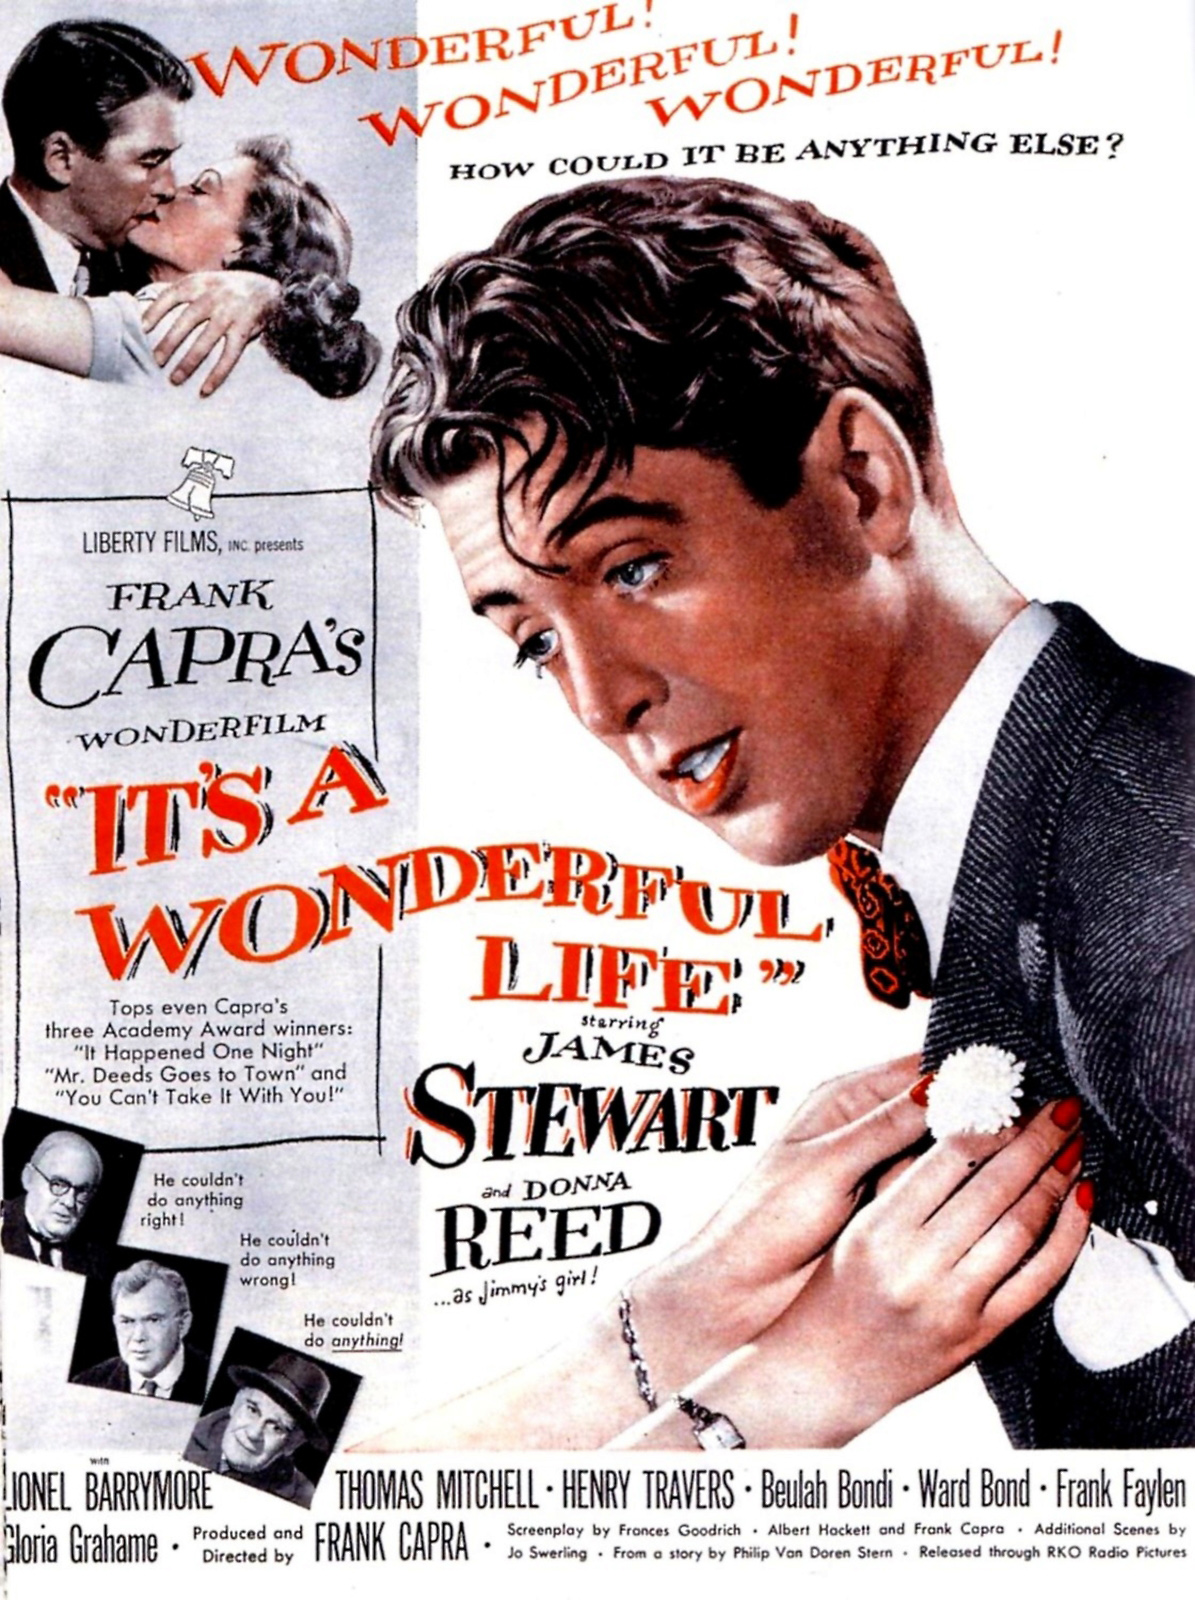 Jimmy Stewart and Thomas Mitchell in “It's a Wonderful Life” (1946